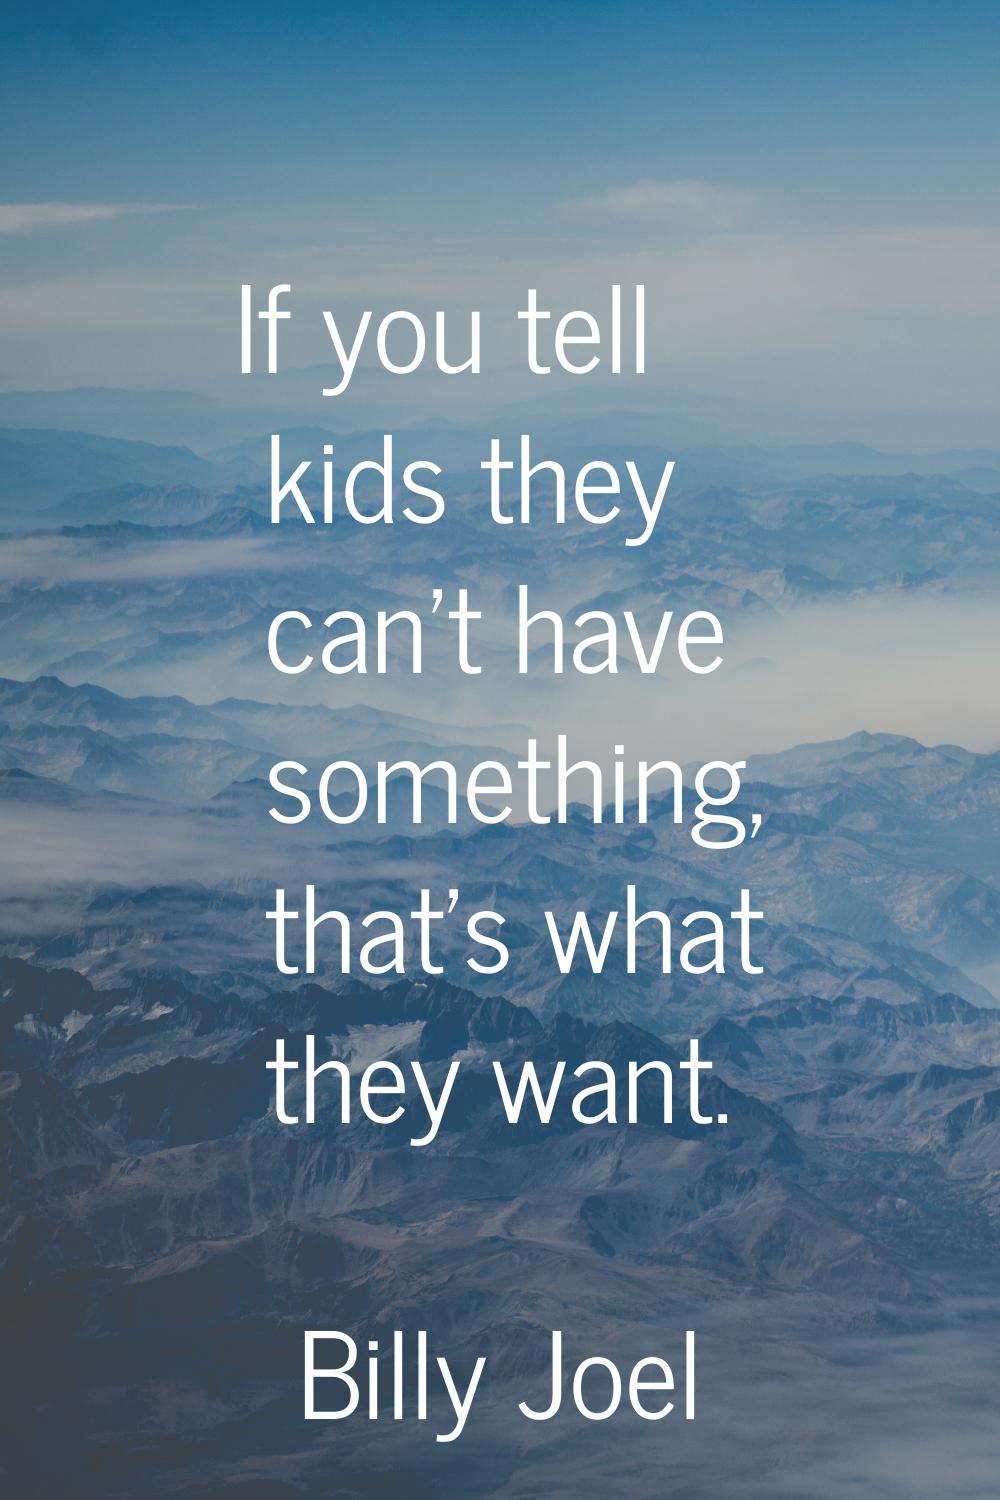 If you tell kids they can't have something, that's what they want.